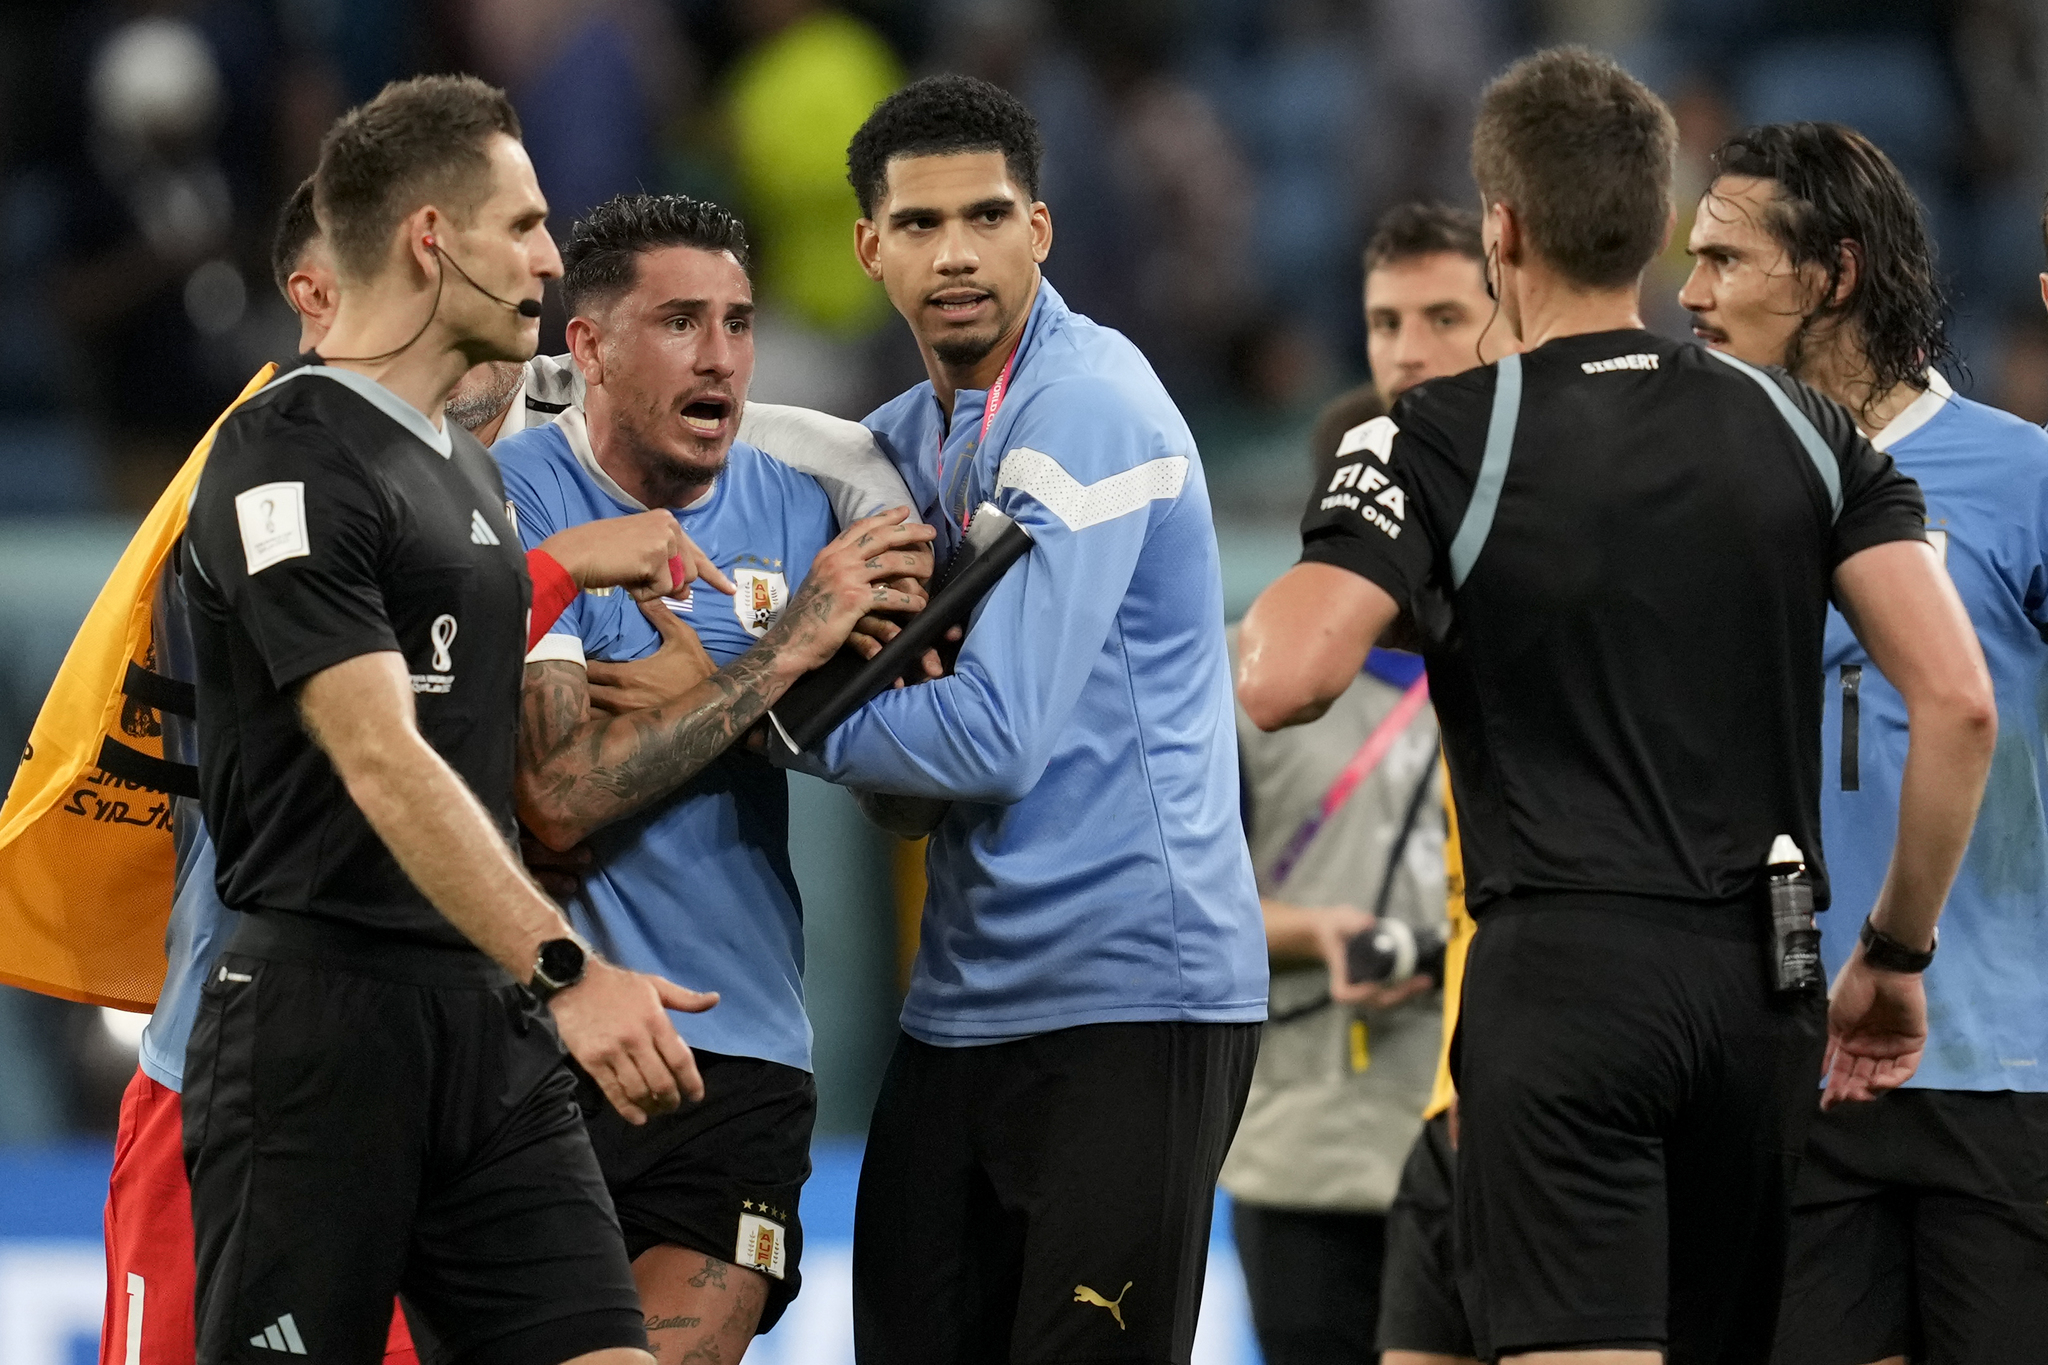  lt;HIT gt;Uruguay lt;/HIT gt;'s Jose Gimenez argues with the referee at the end of a  lt;HIT gt;World lt;/HIT gt;  lt;HIT gt;Cup lt;/HIT gt; group H soccer match against Ghana at the Al Janoub Stadium in Al Wakrah, Qatar, Friday, Dec. 2, 2022. (AP Photo/Darko Vojinovic)